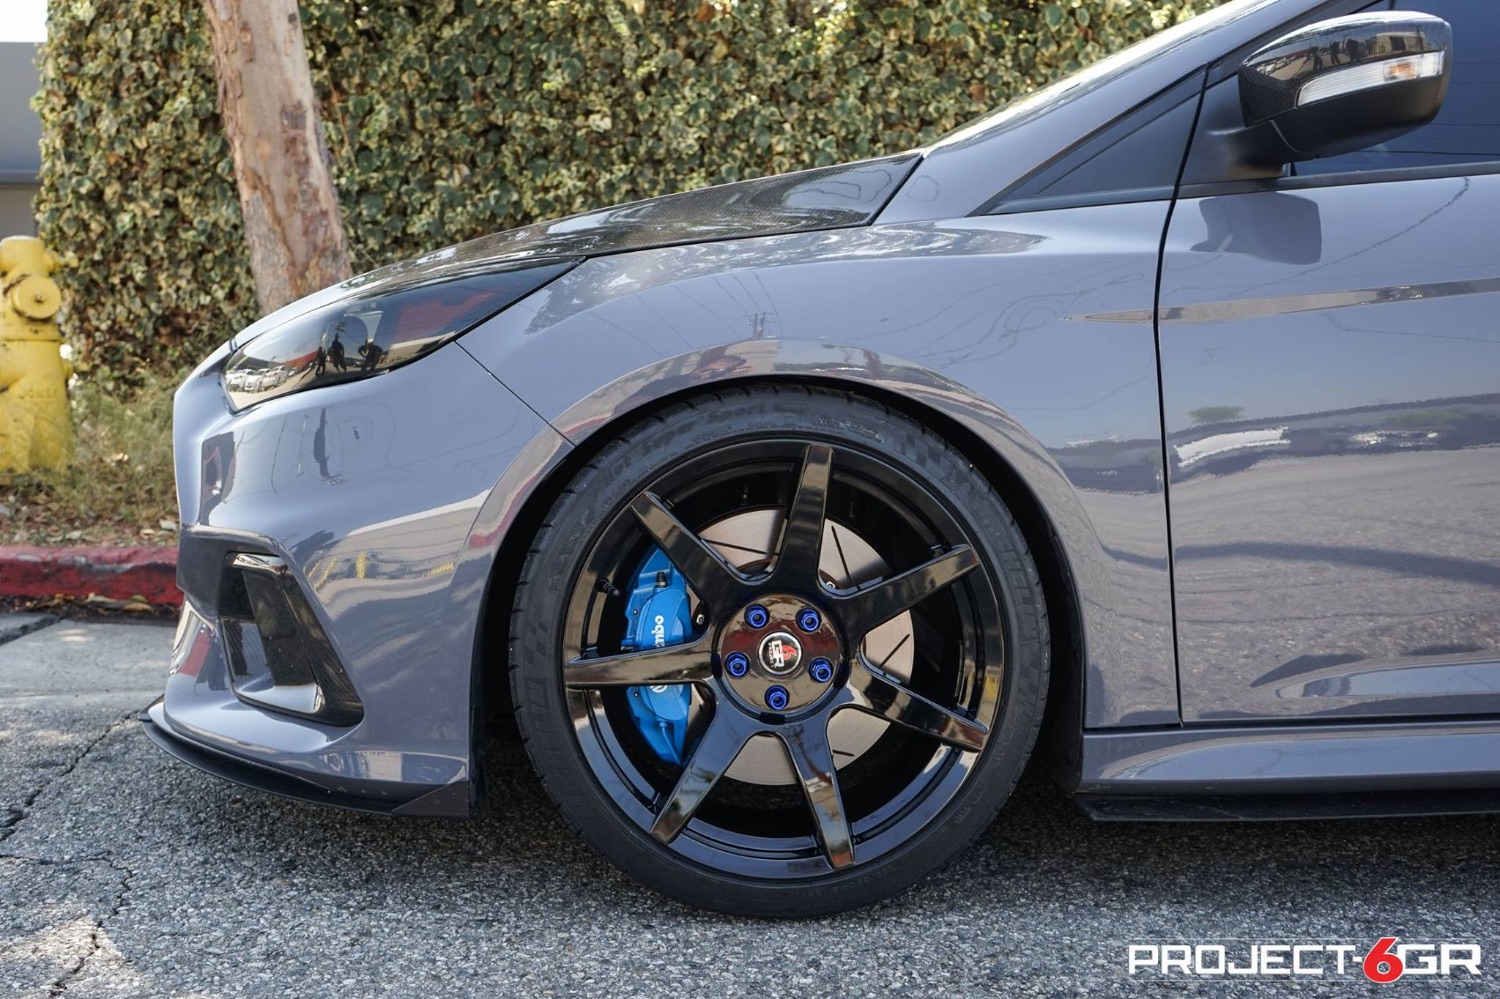 project-6gr-19x9.5-gloss-black-ford-focus-rs-05